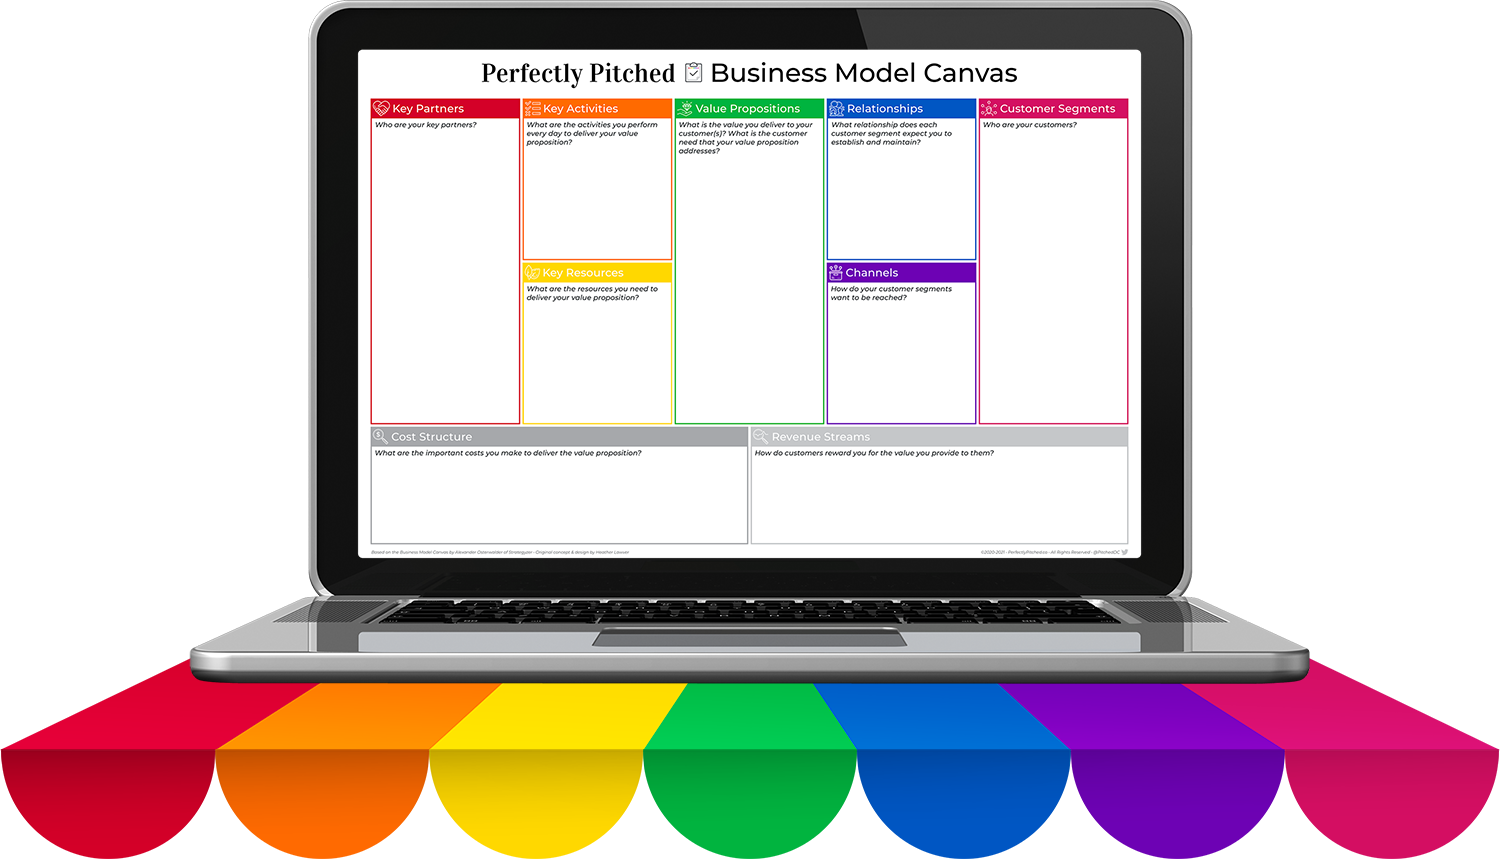 Here Heather explains the Business Model Canvas, before showing how she transforms it into the Brand Model Canvas, a guide to using your business model as the blueprint for your branding in "Why Design Matters"